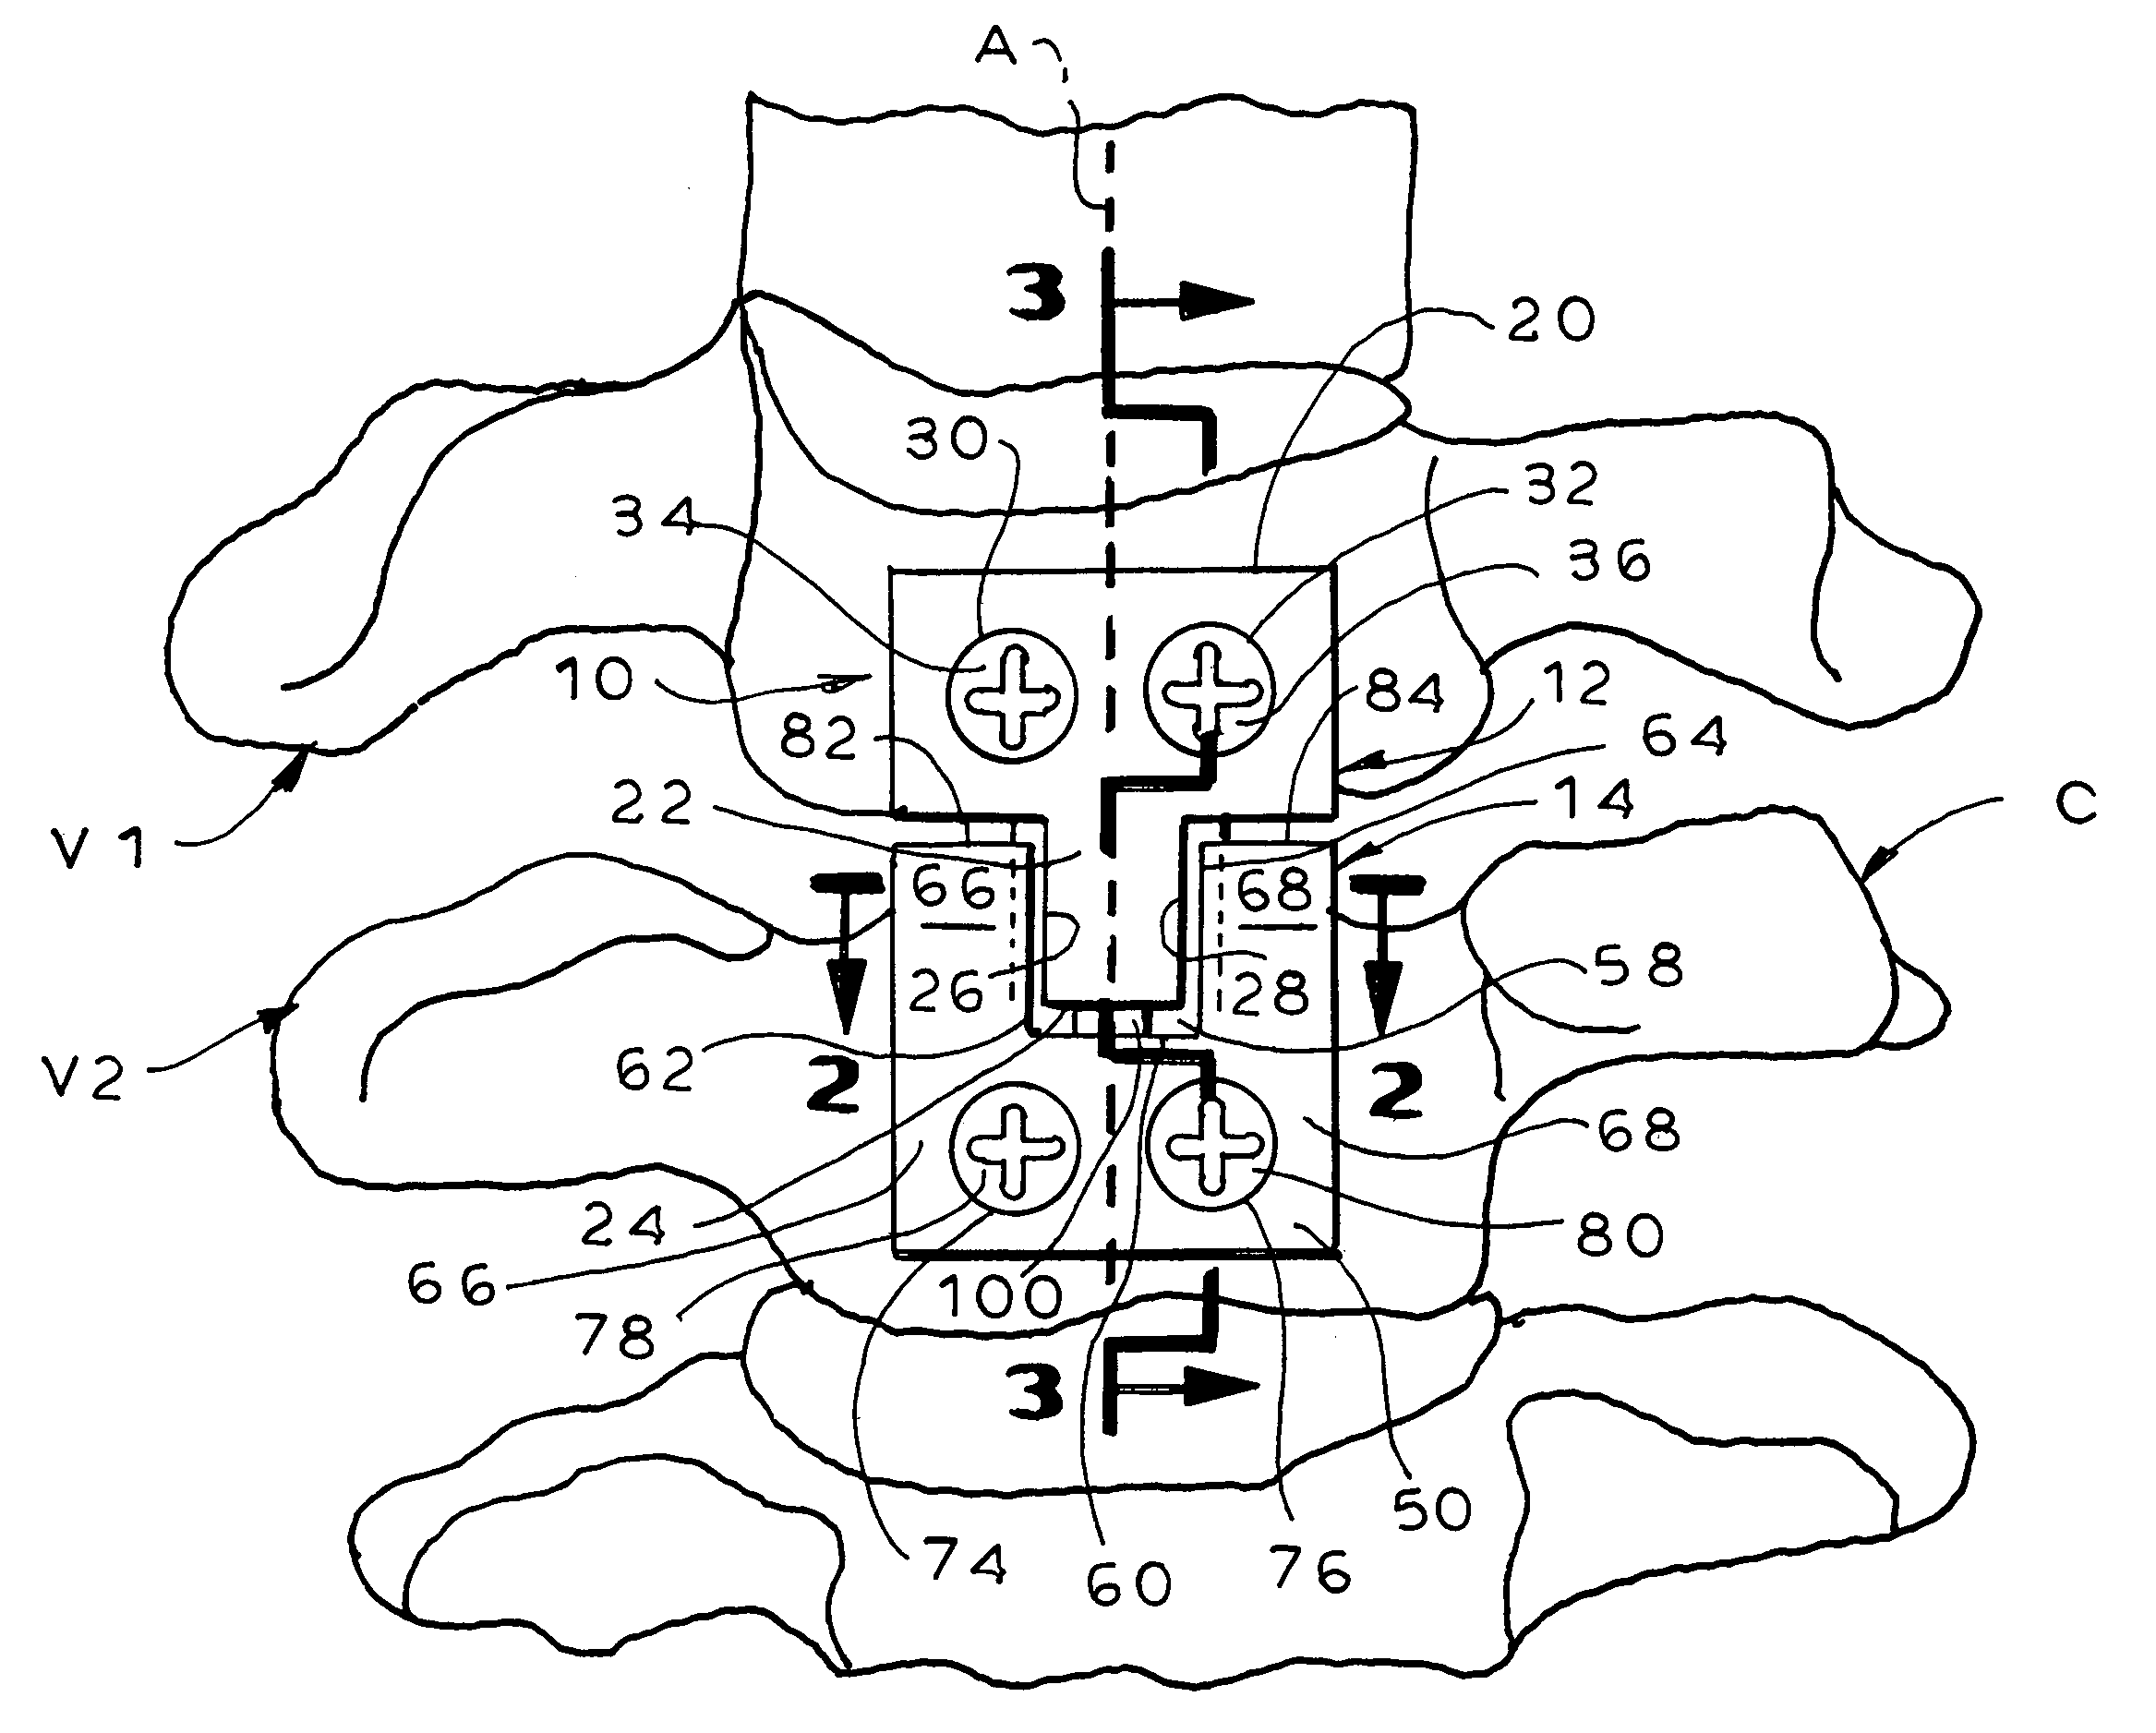 Methods and apparatus for promoting fusion of vertebrae